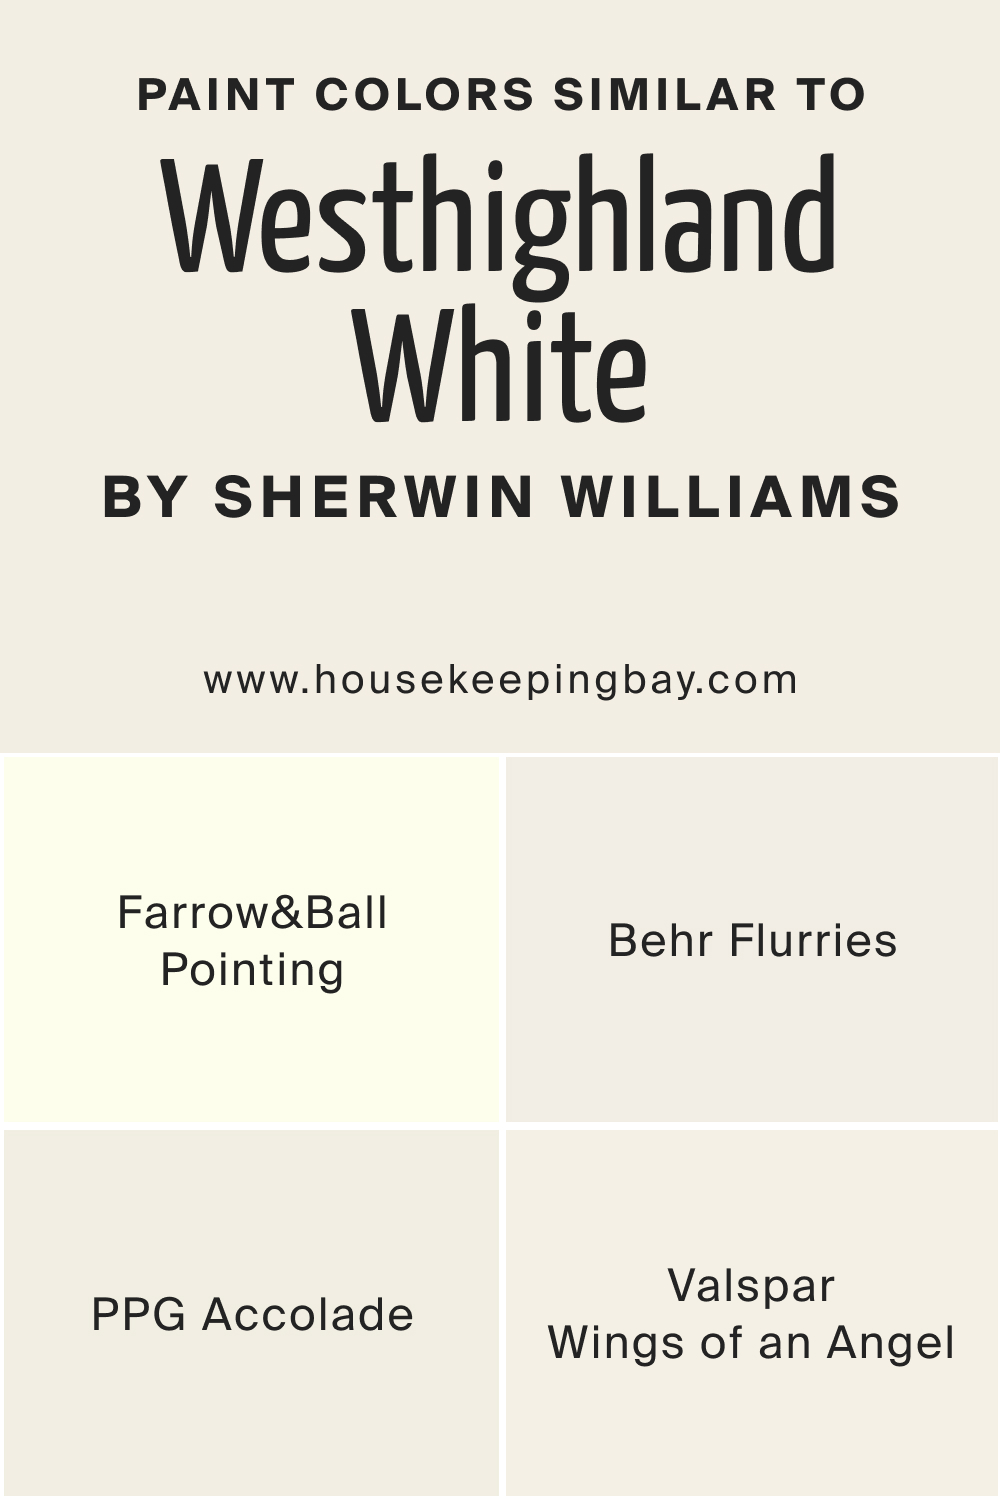 Paint Colors Similar to Westhighland White SW 7566 by Sherwin Williams